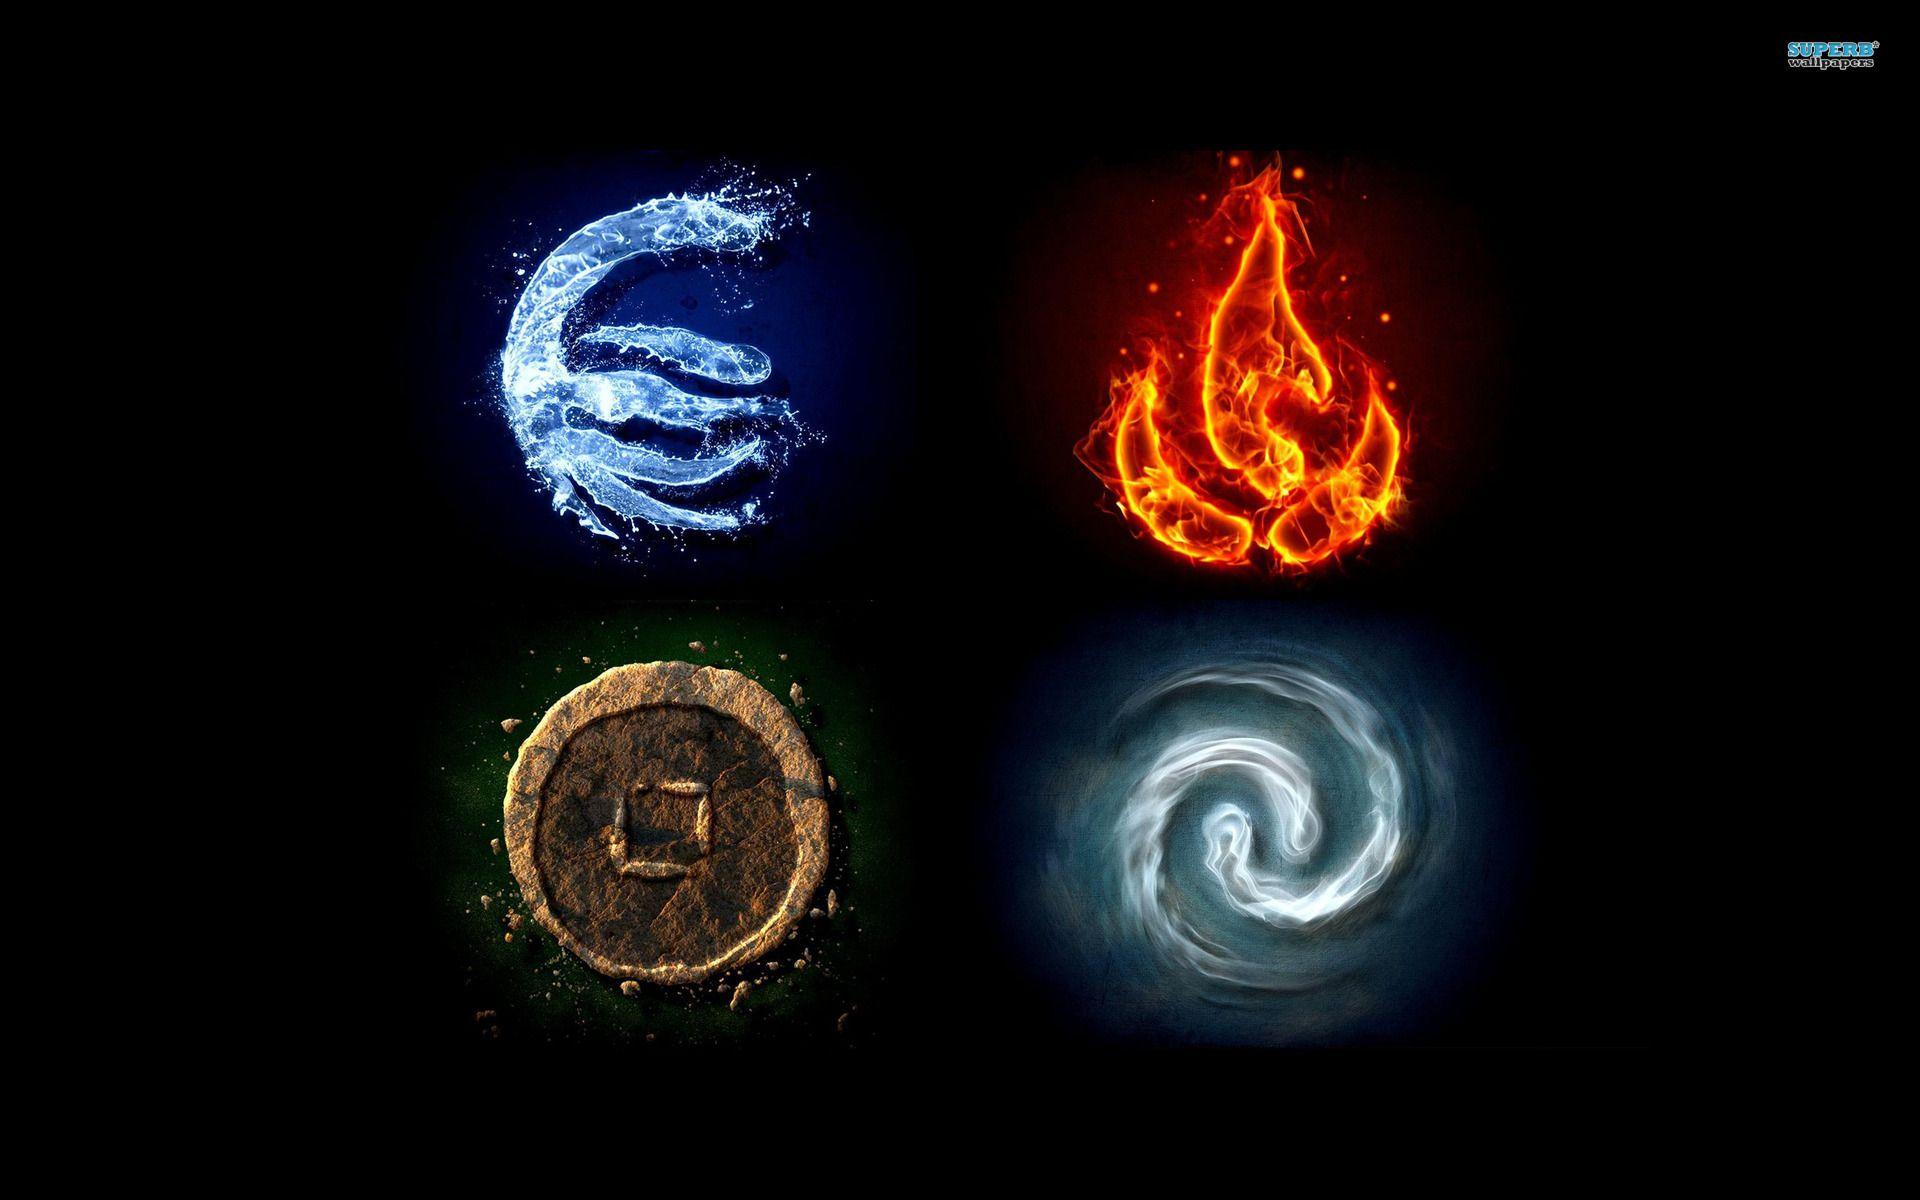 Elemnts. avatar the last airbender. Types of dragons